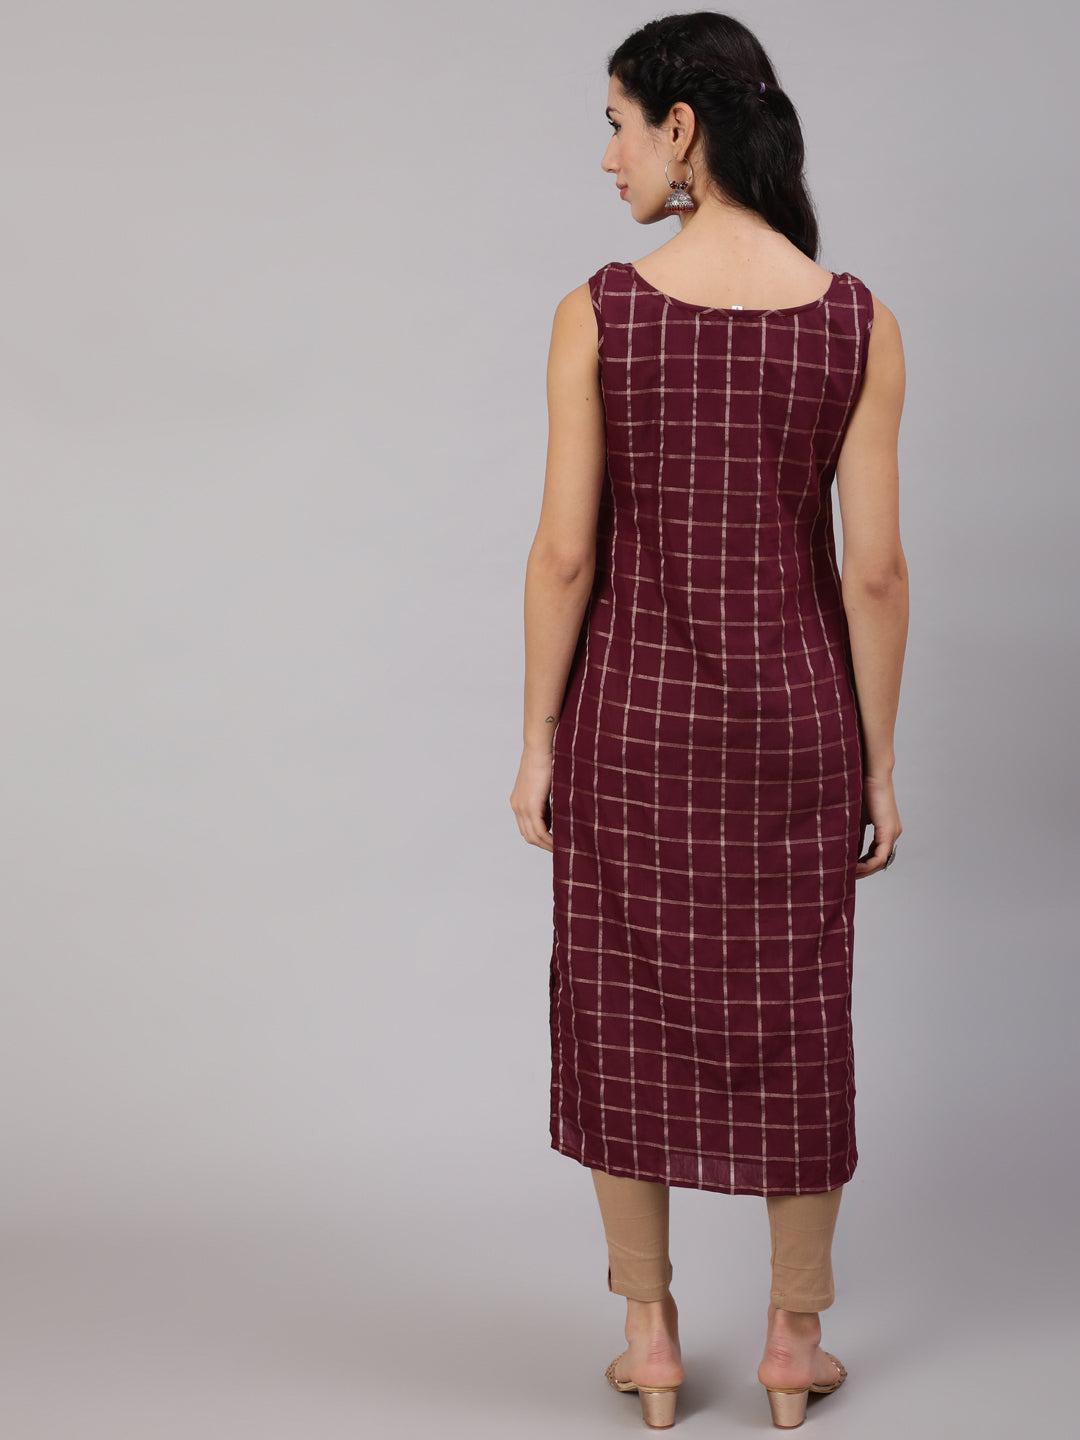 Women's Burgundy Checked Kurta With Lace Details - Aks